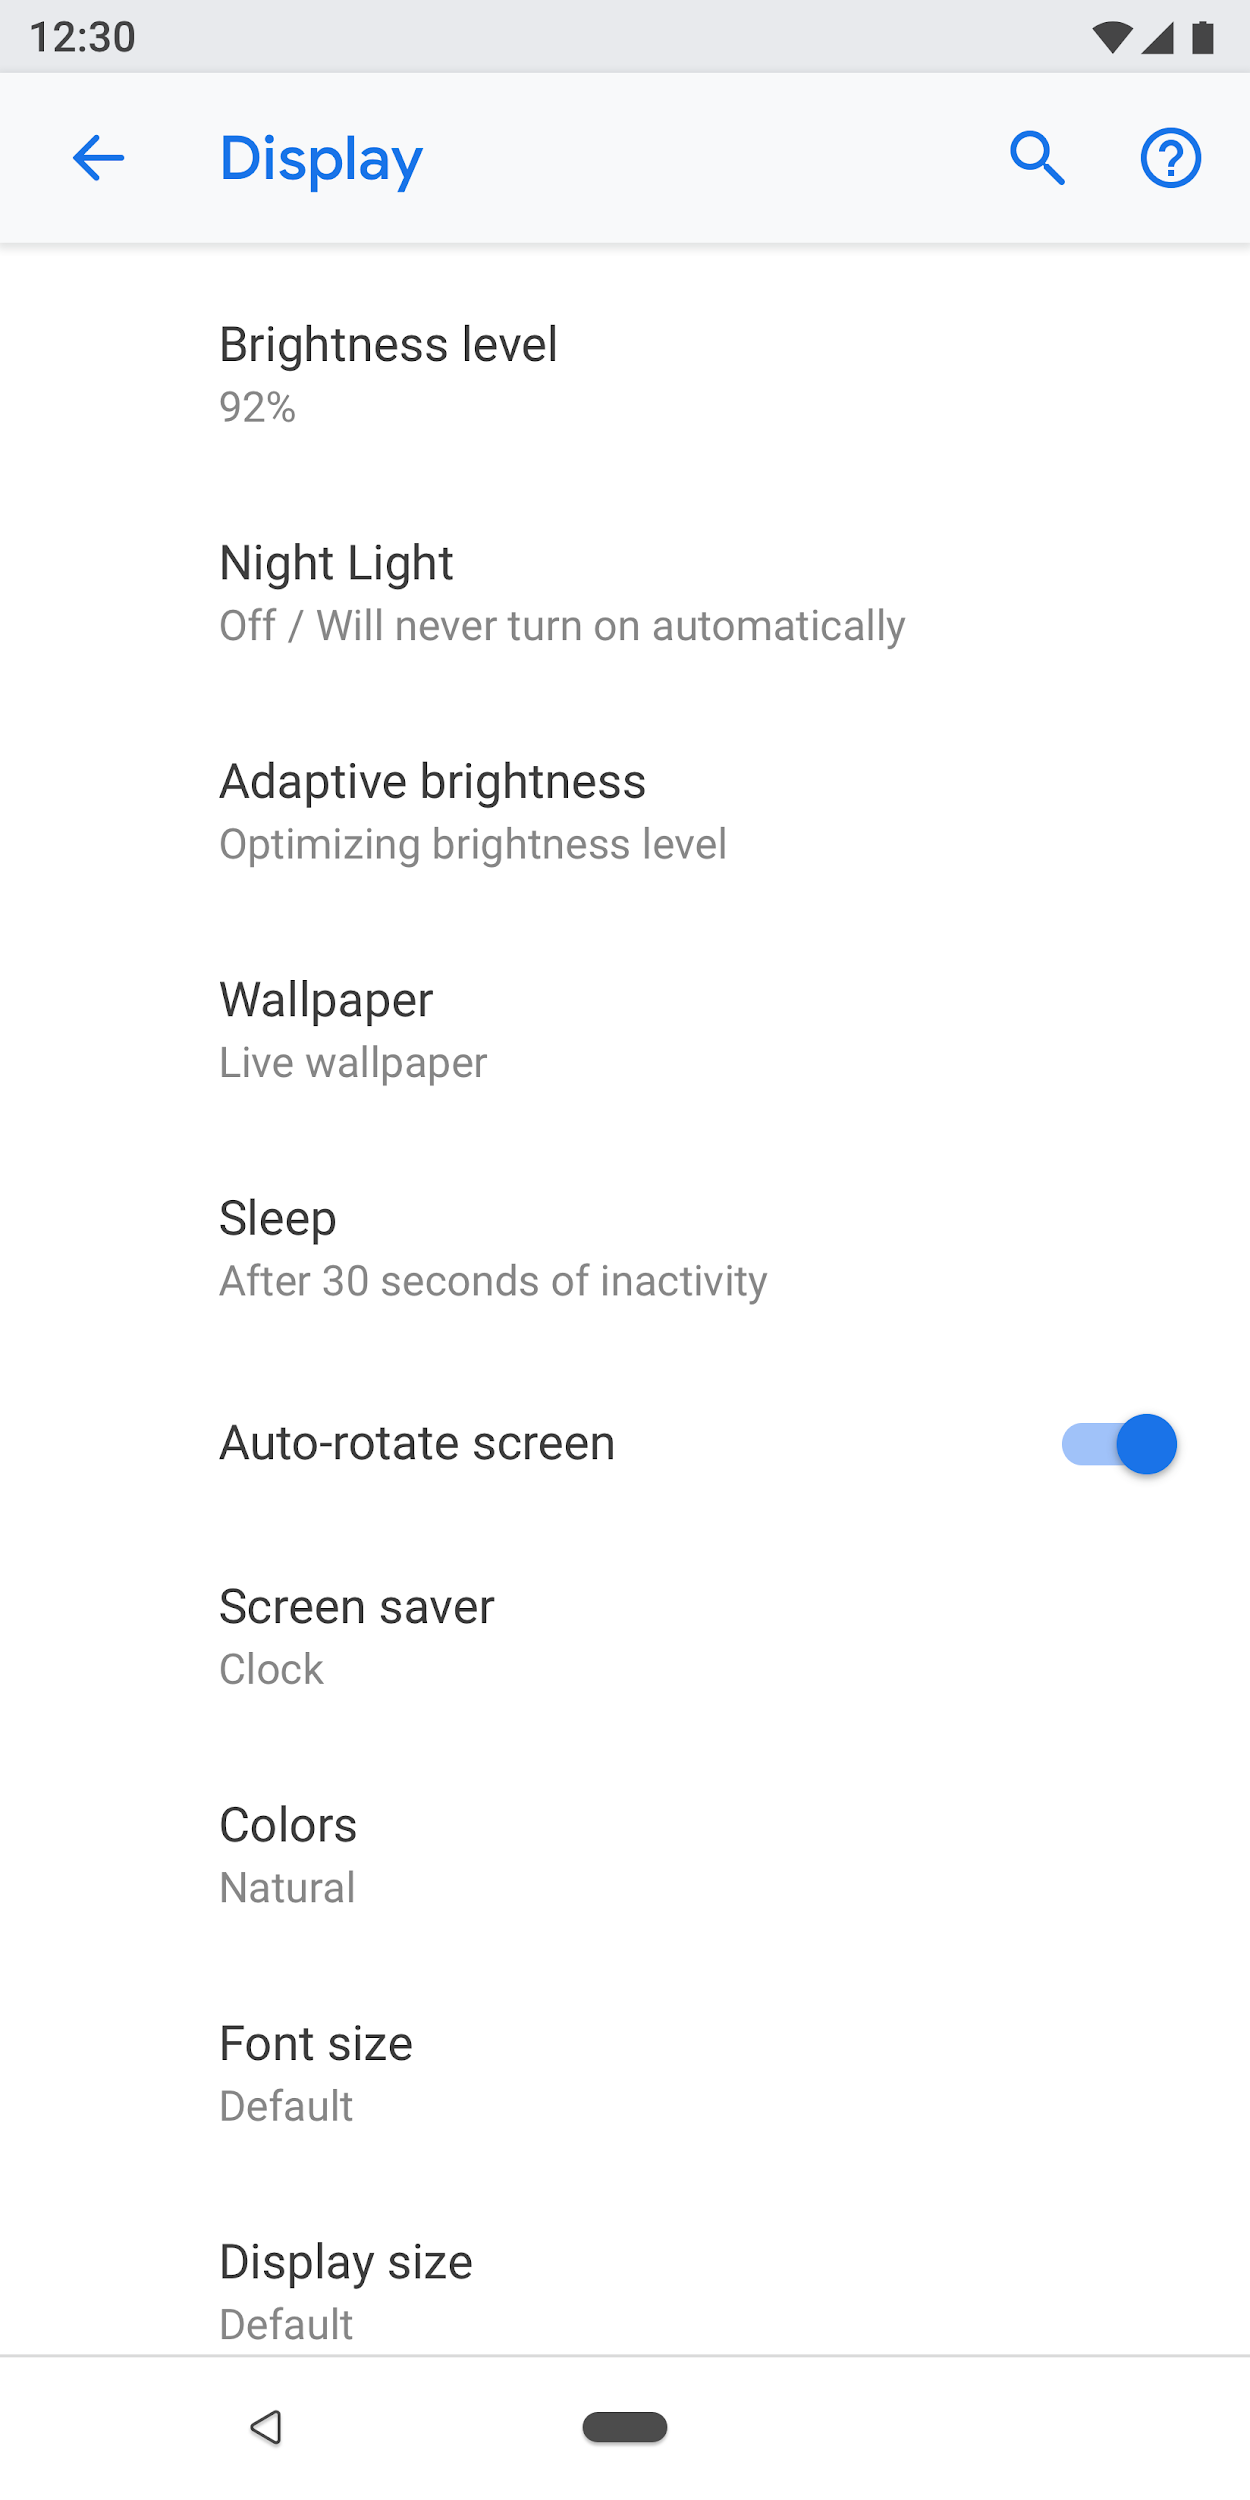 Go to the "Settings" menu on your Android device.
Select "Apps" or "Applications" from the list.